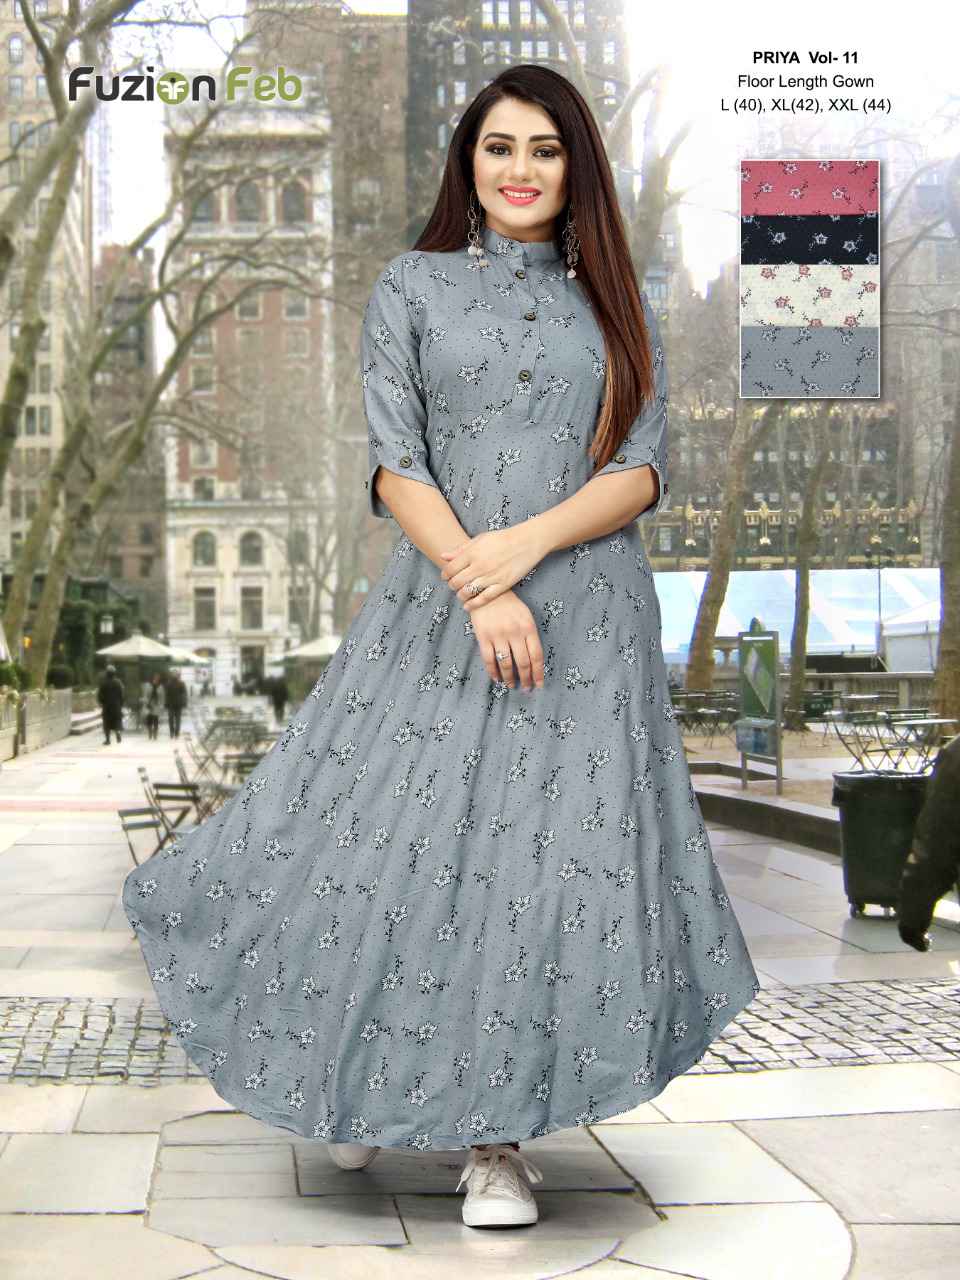 Discover more than 149 best selling kurtis super hot